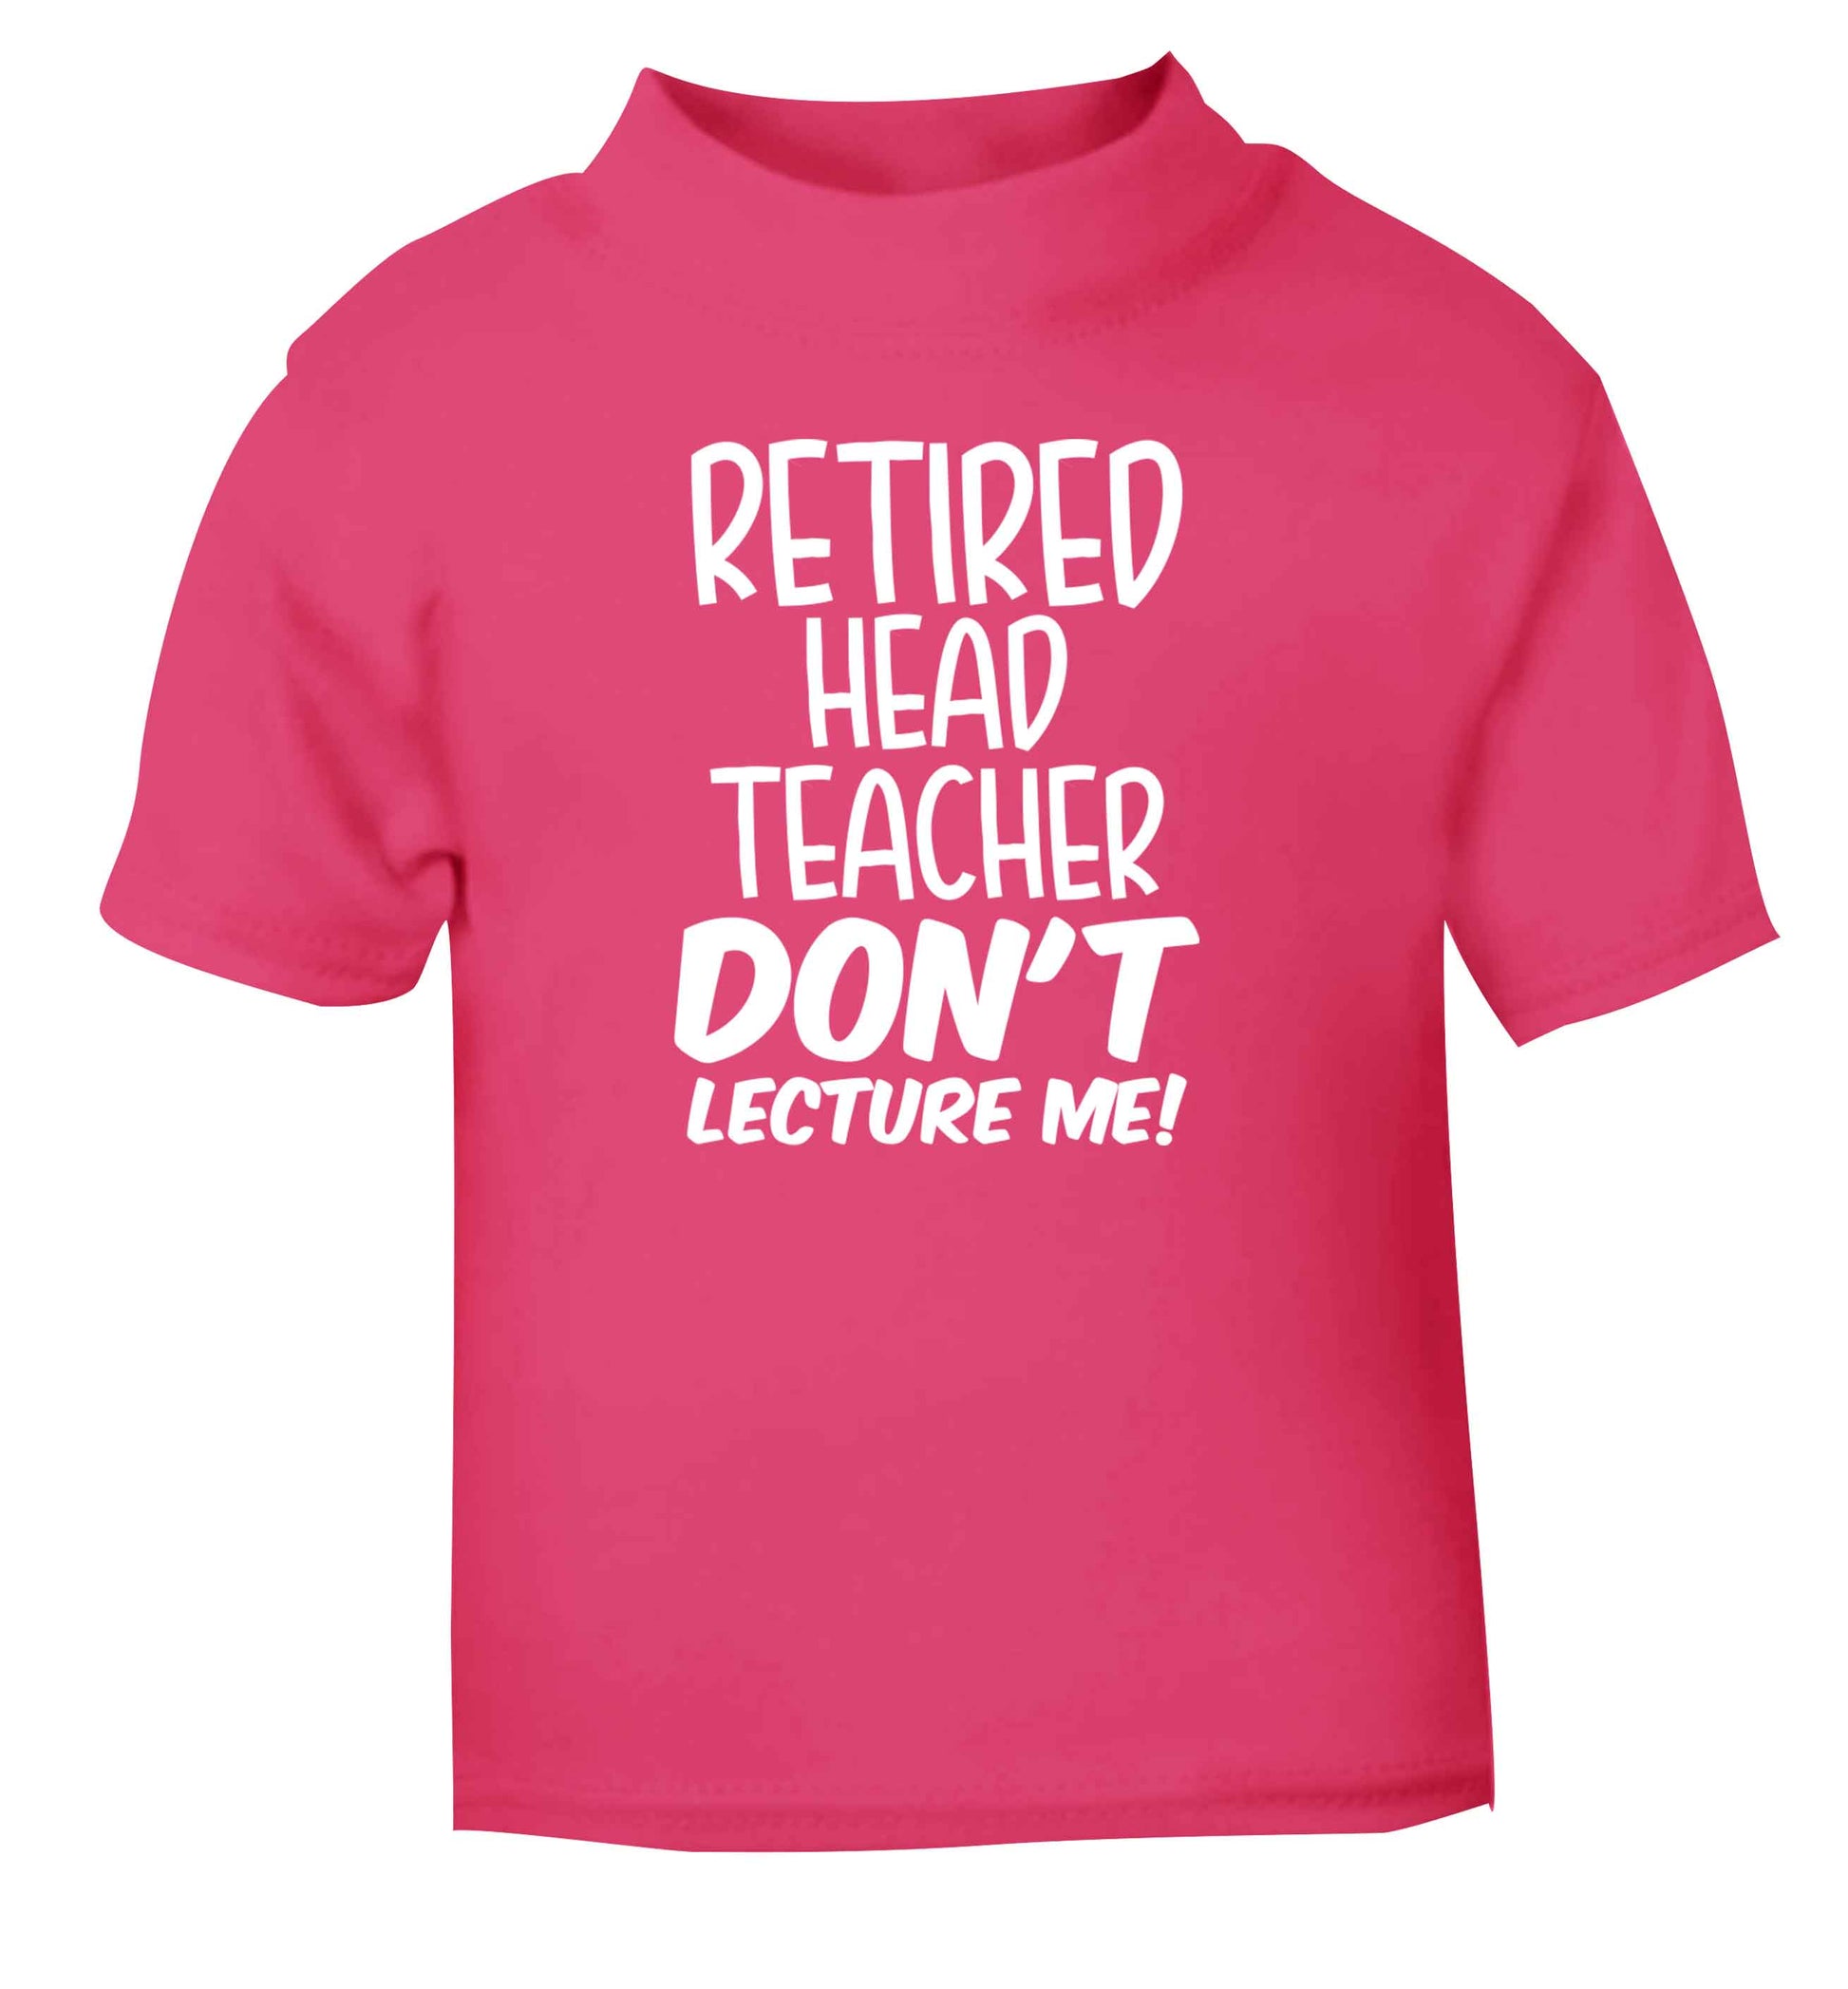 Retired head teacher don't lecture me! pink Baby Toddler Tshirt 2 Years